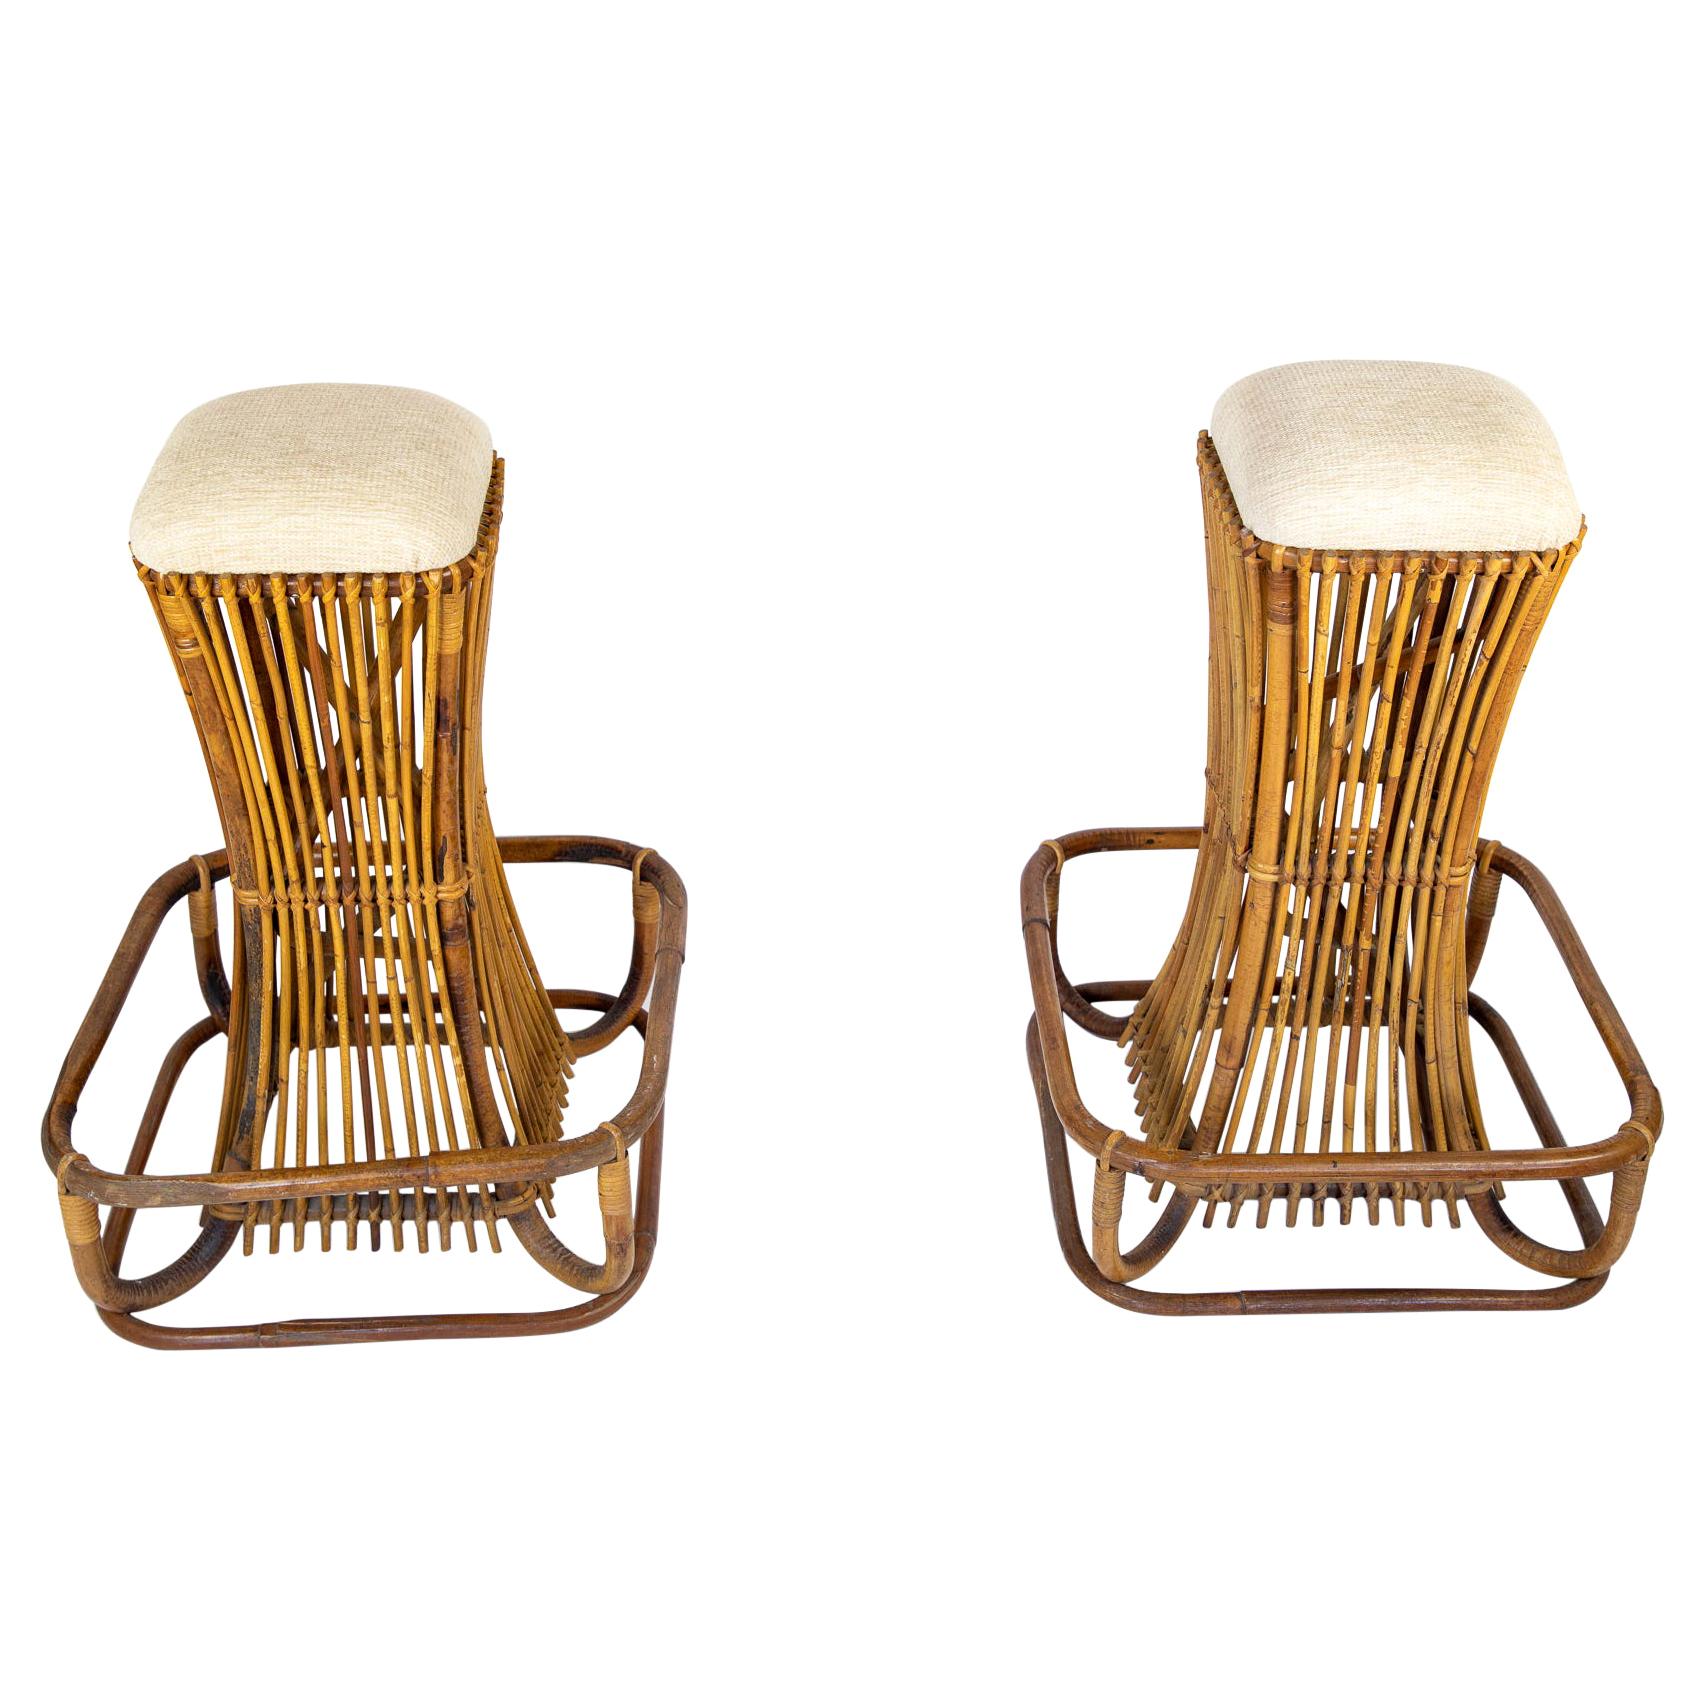 Handcrafted Bamboo Rattan Outdoor Bar Stools by Tito Agnoli, Italy 1960s